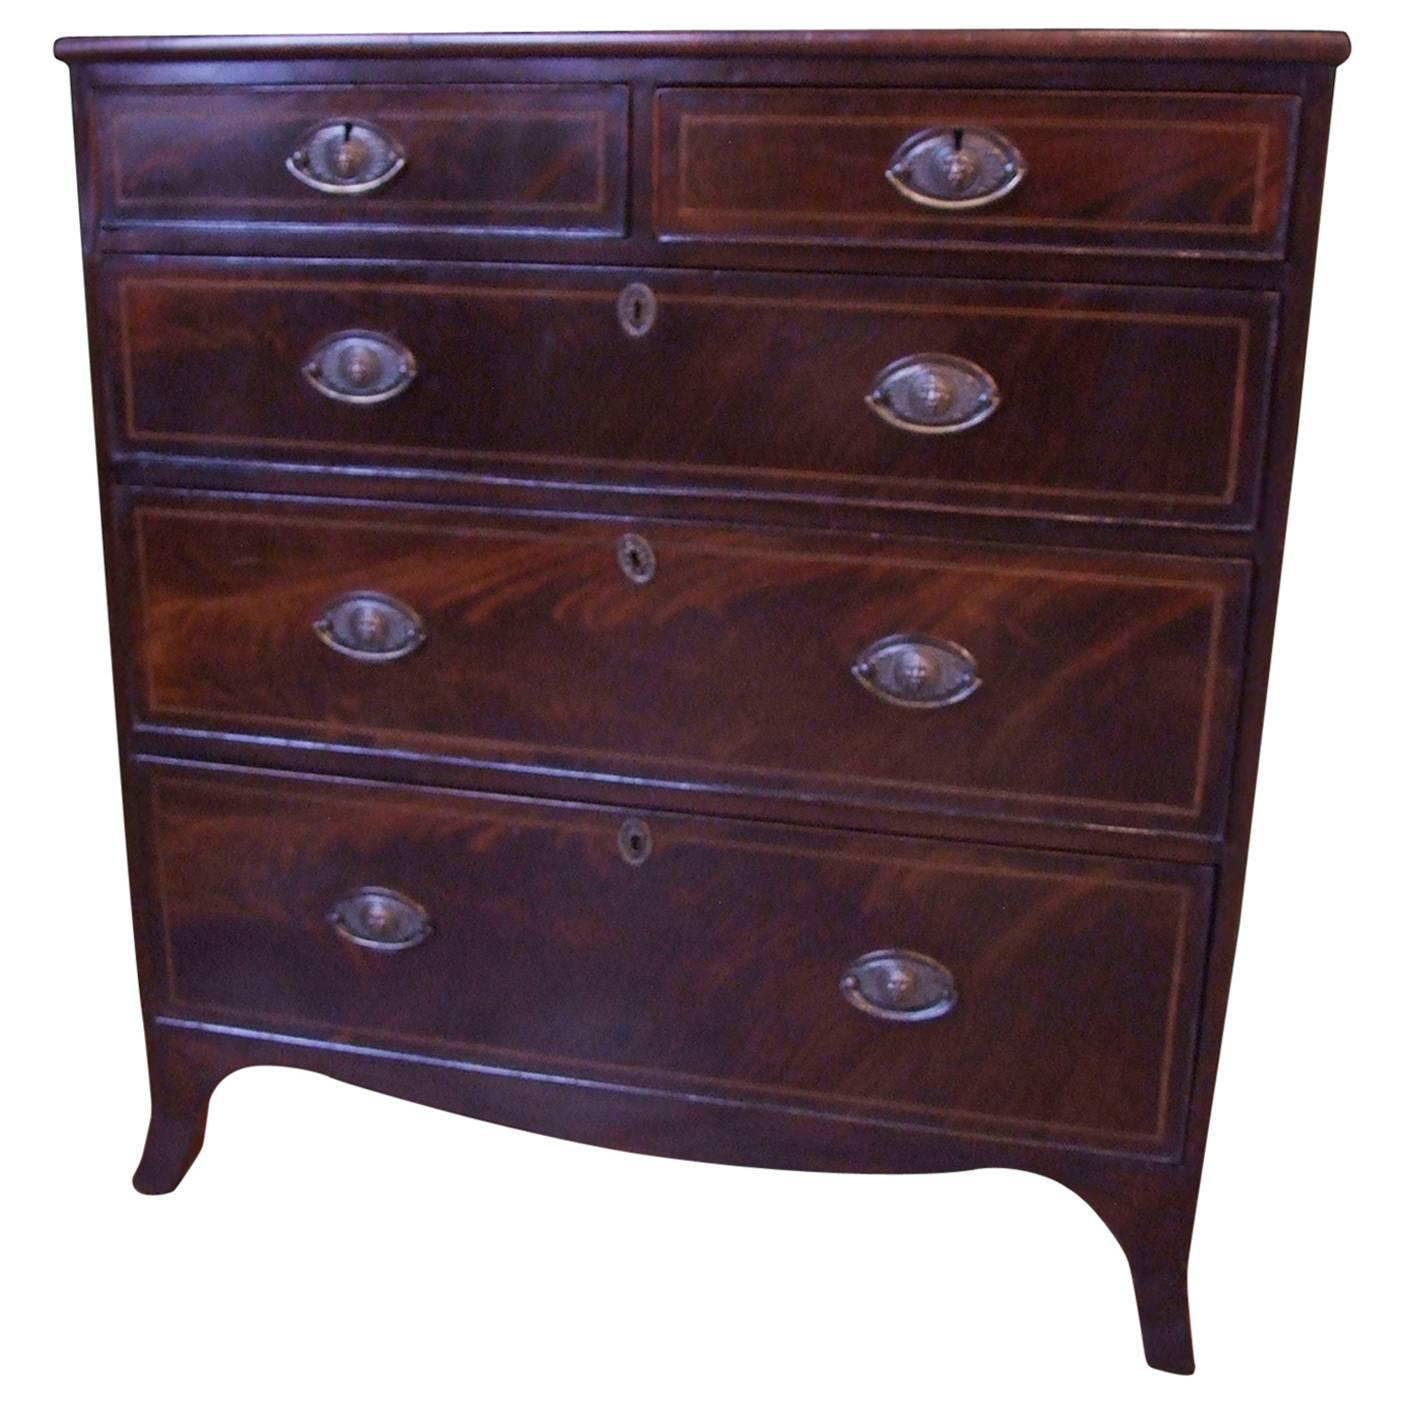 Late Georgian Mahogany and Satinwood Inlaid Crossbanded Chest of Drawers For Sale